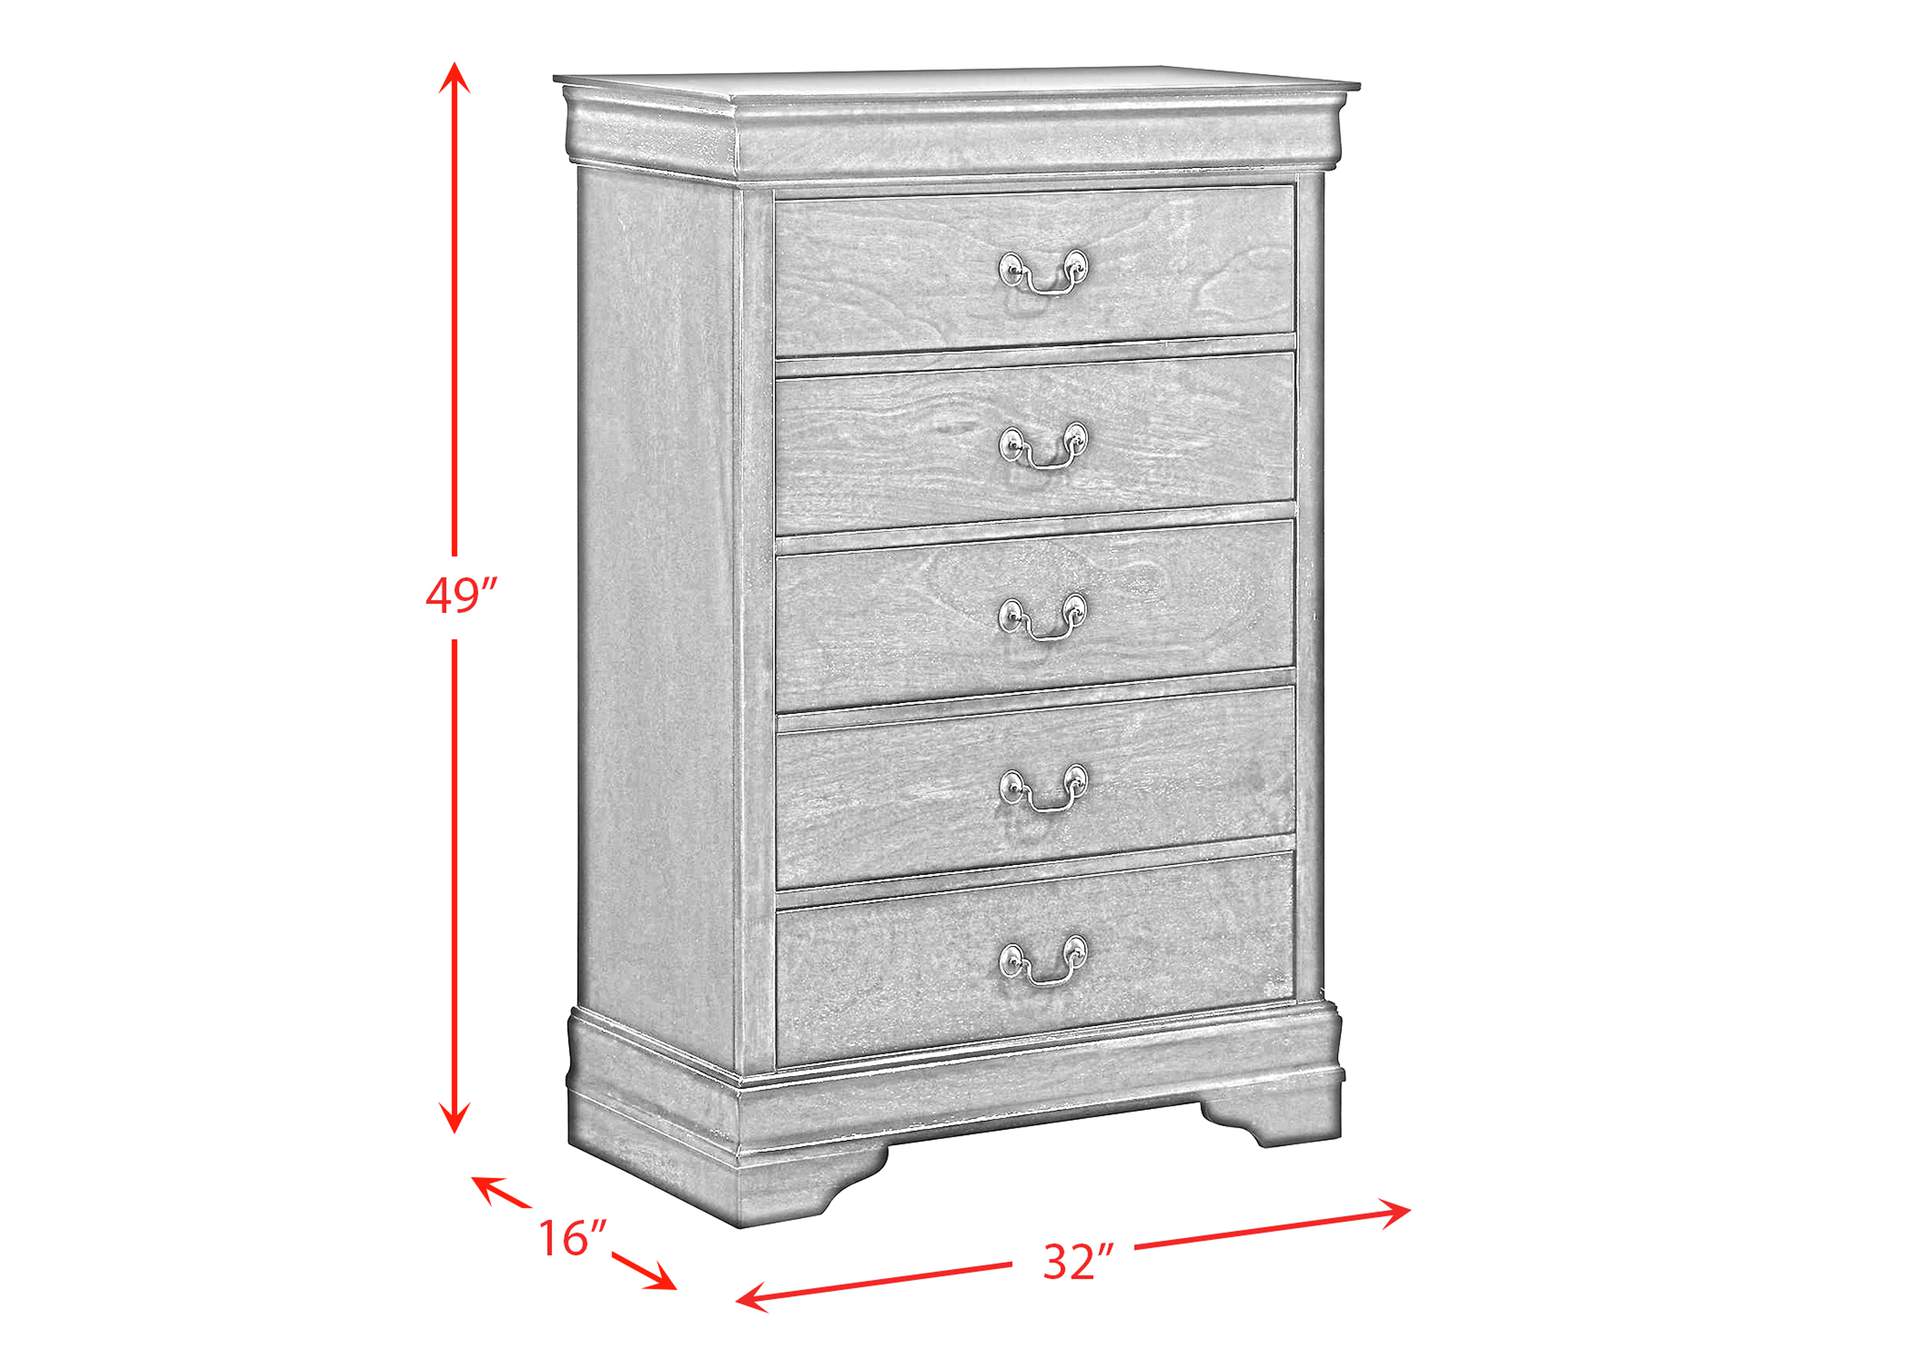 Louis Philippe 5-Drawer Chest in Black,Elements